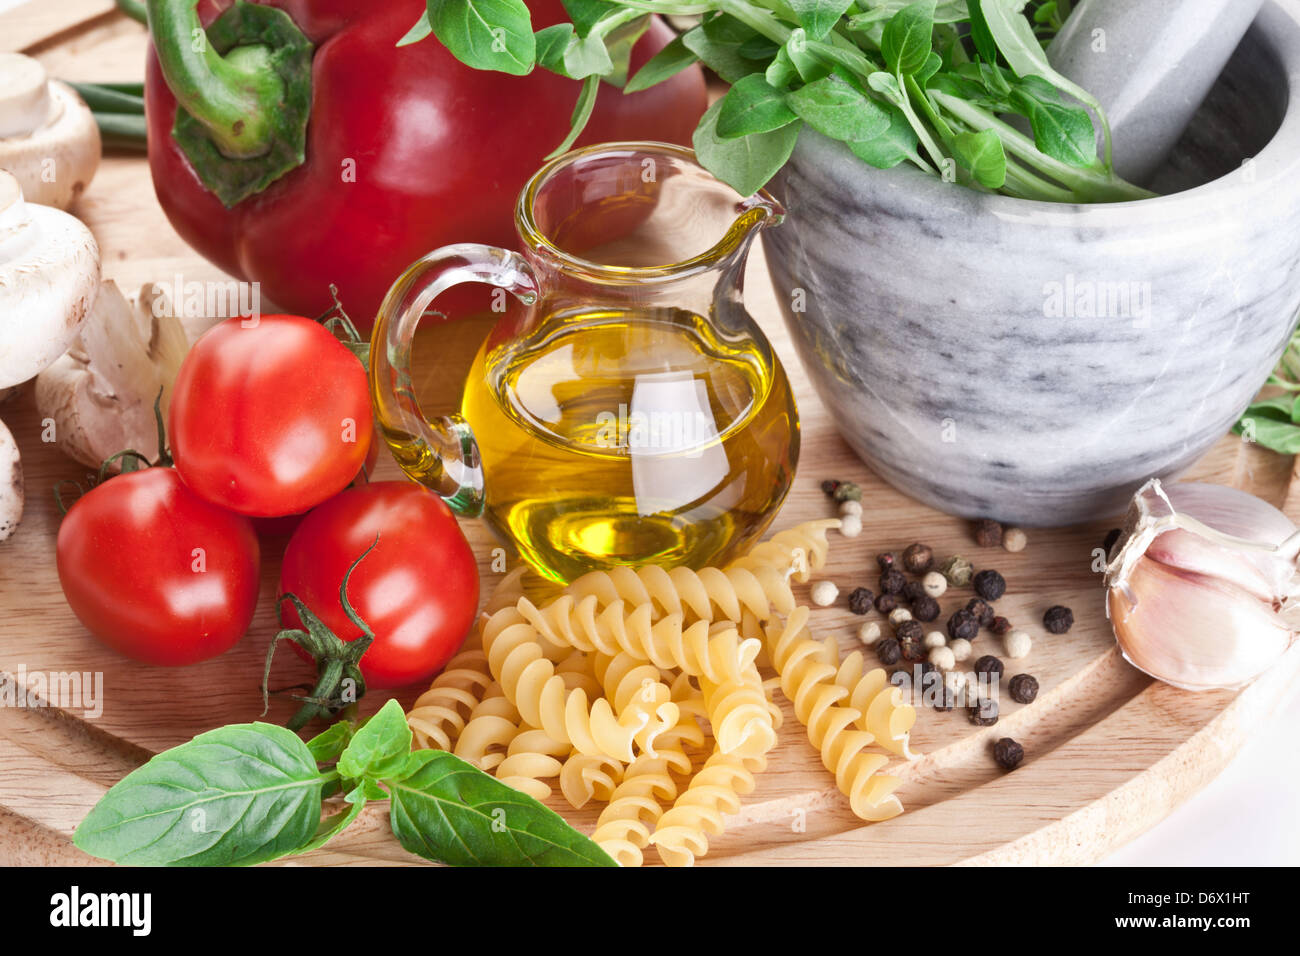 Olive oil, vegetables and herbs. Close-up shot. Stock Photo